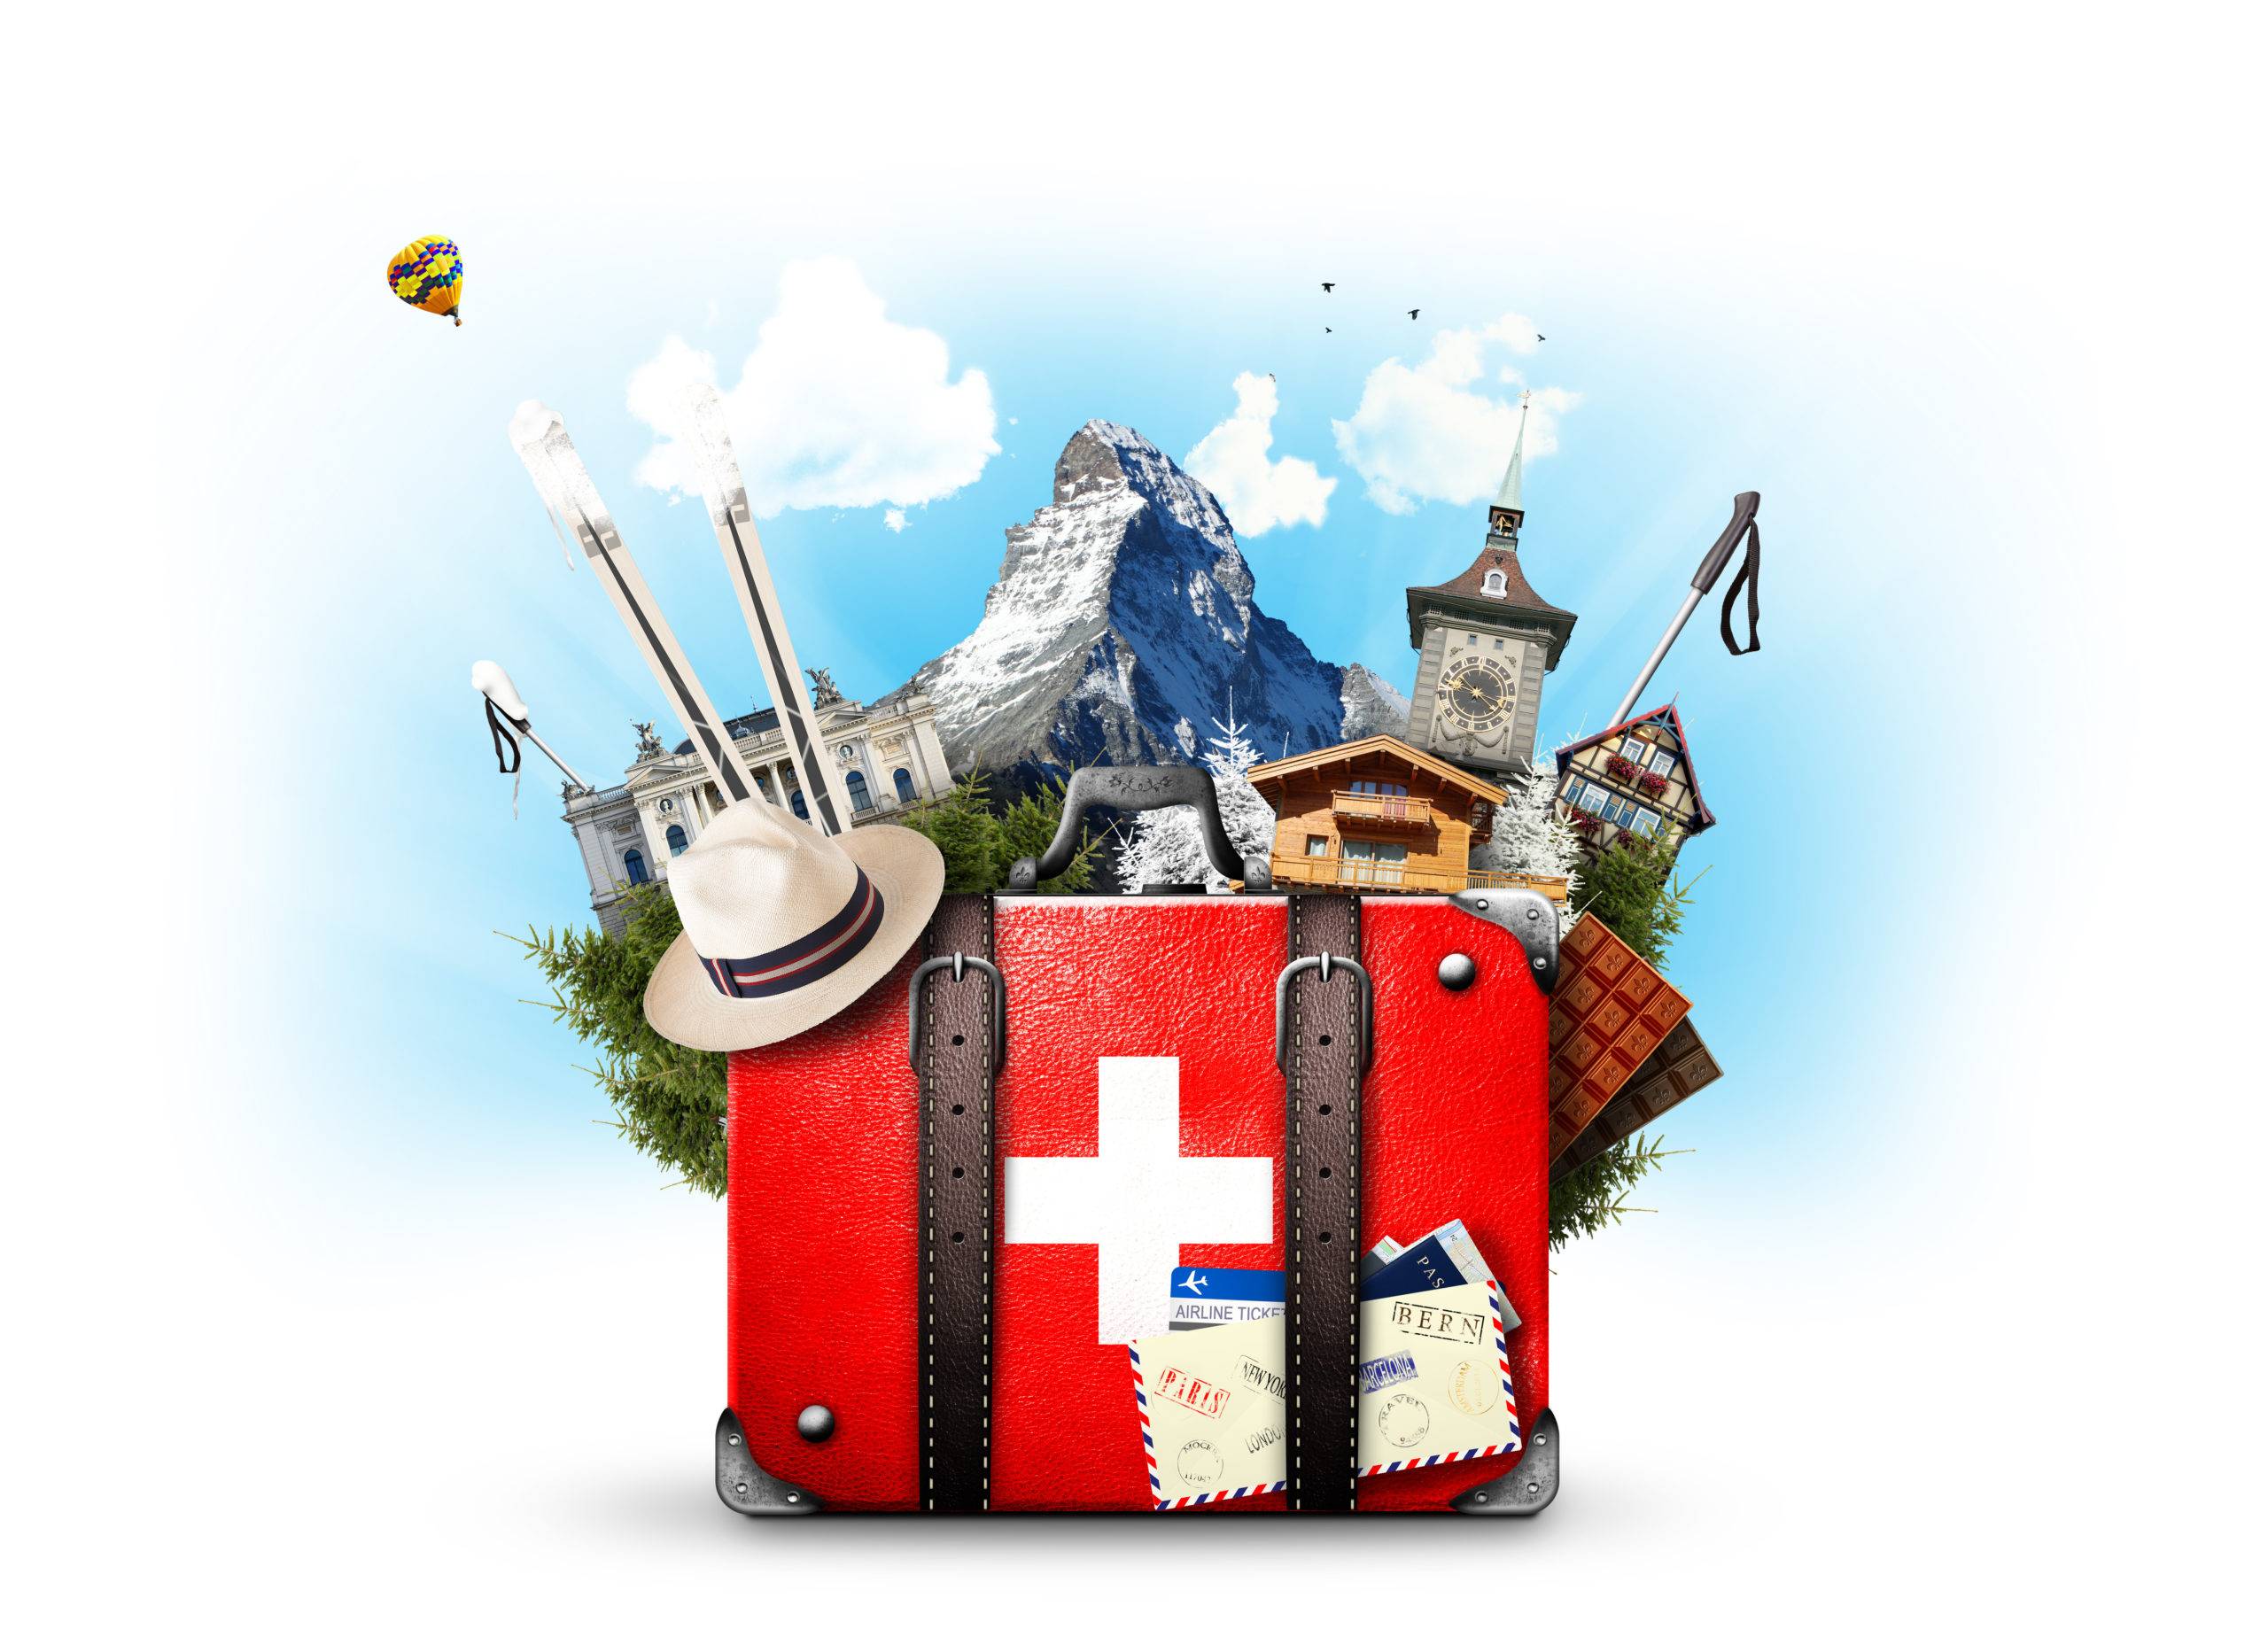 A vibrant red suitcase bearing a Swiss cross emblem.